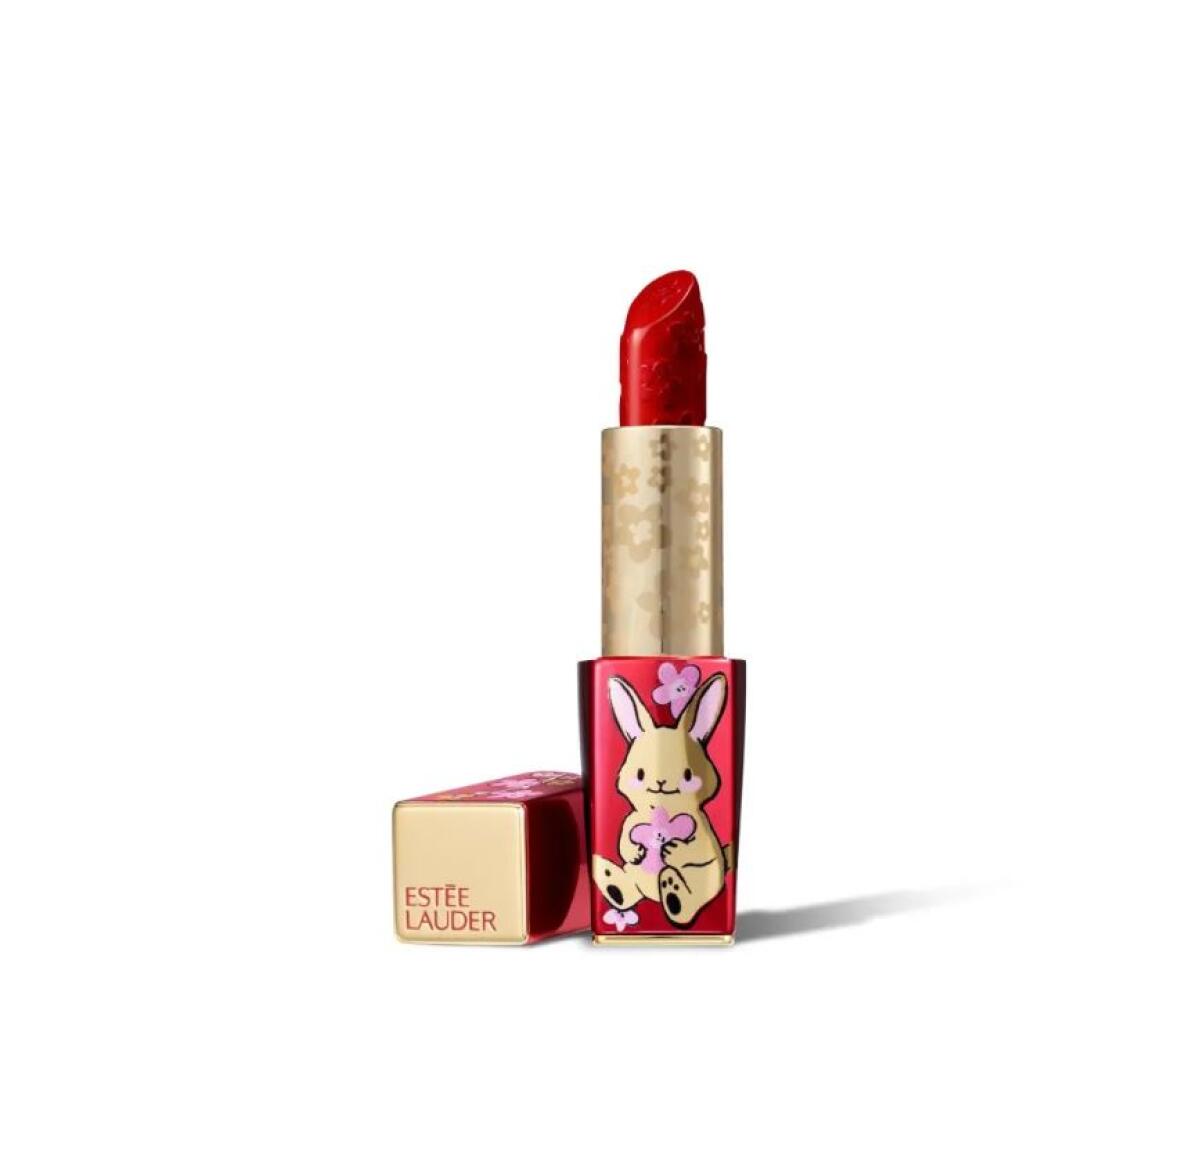 Estee Lauder red lipstick comes in a tube with a rabbit on it